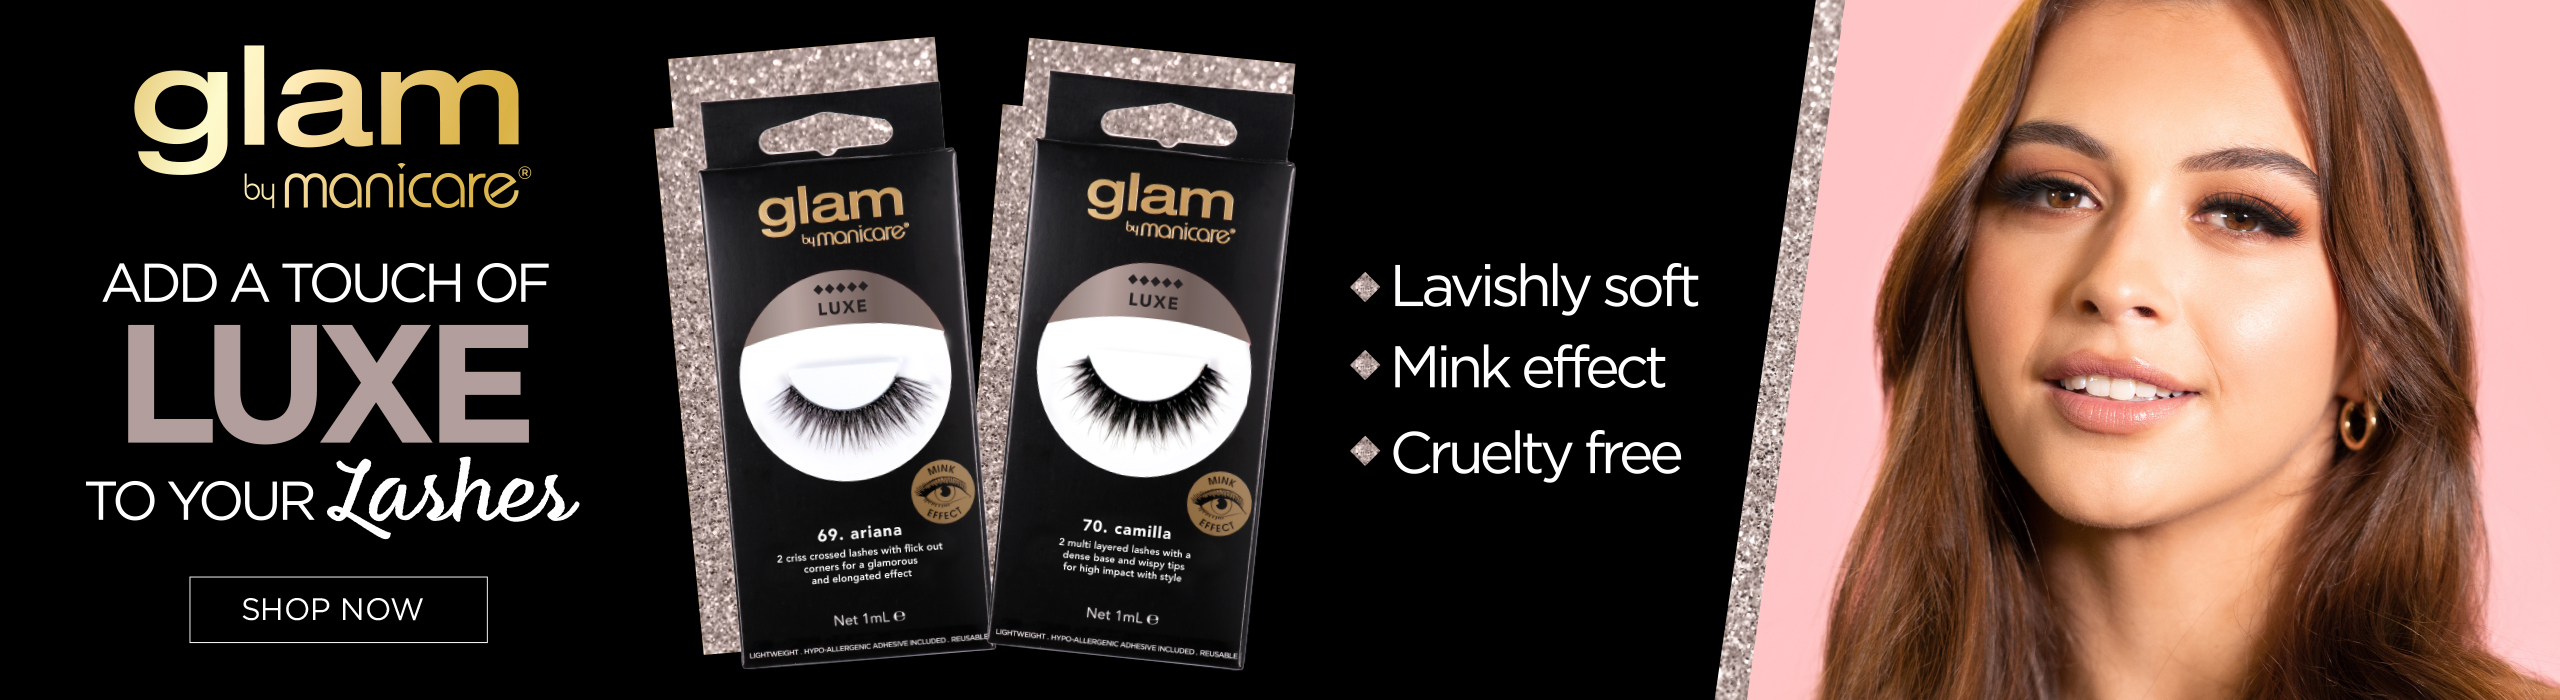 Glam by Manicare - Add a Touch of Luxe to Your Lashes